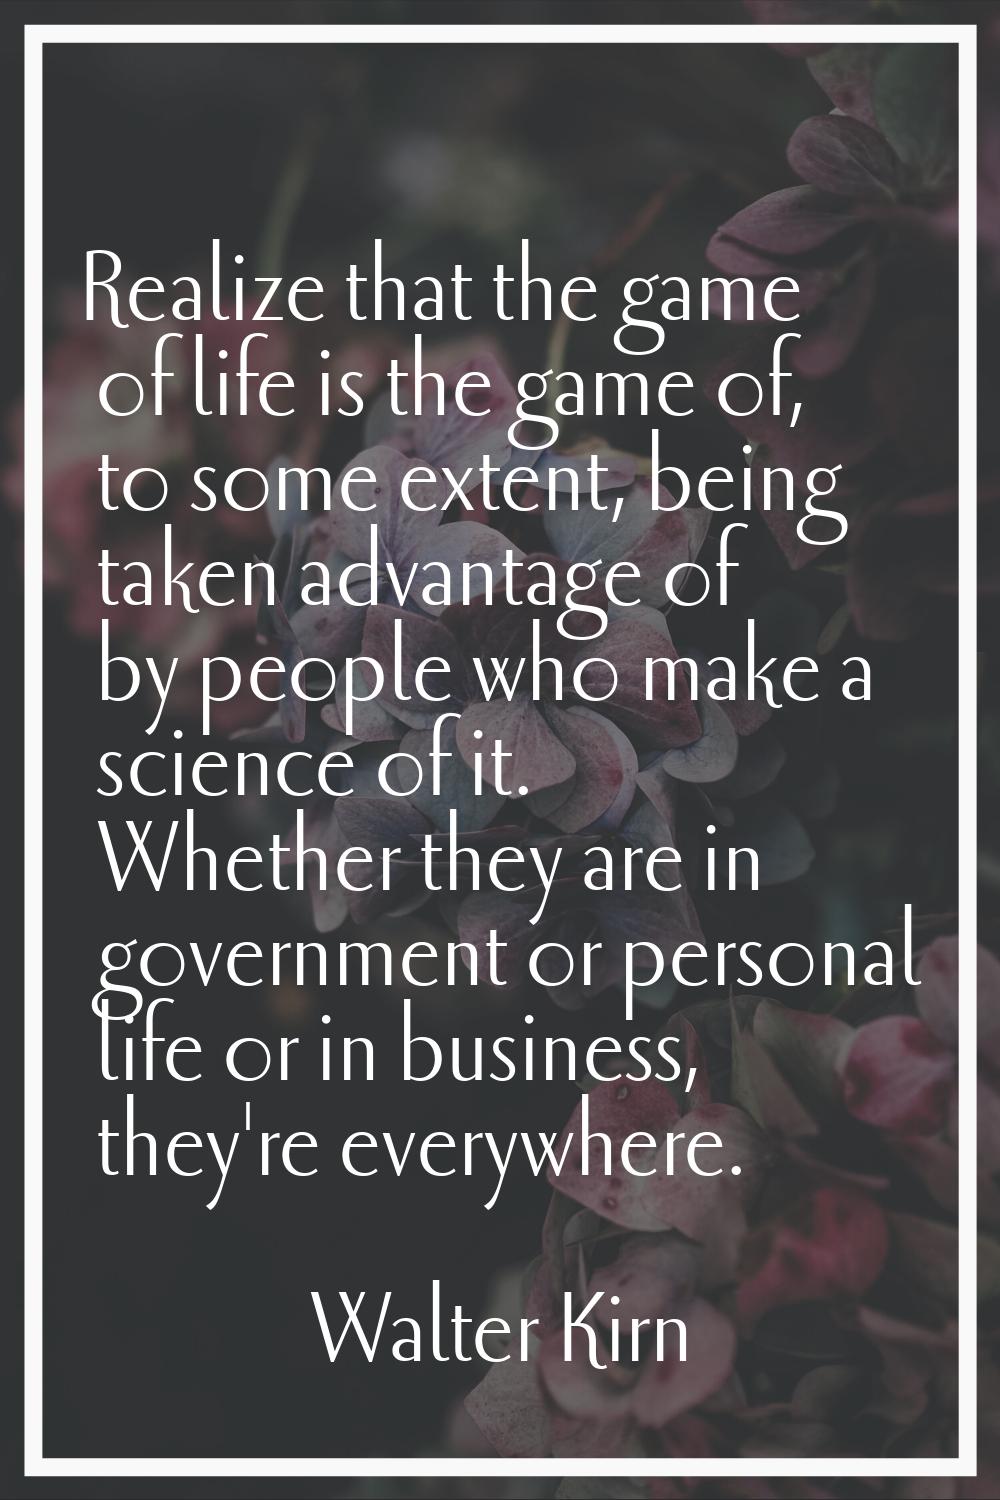 Realize that the game of life is the game of, to some extent, being taken advantage of by people wh